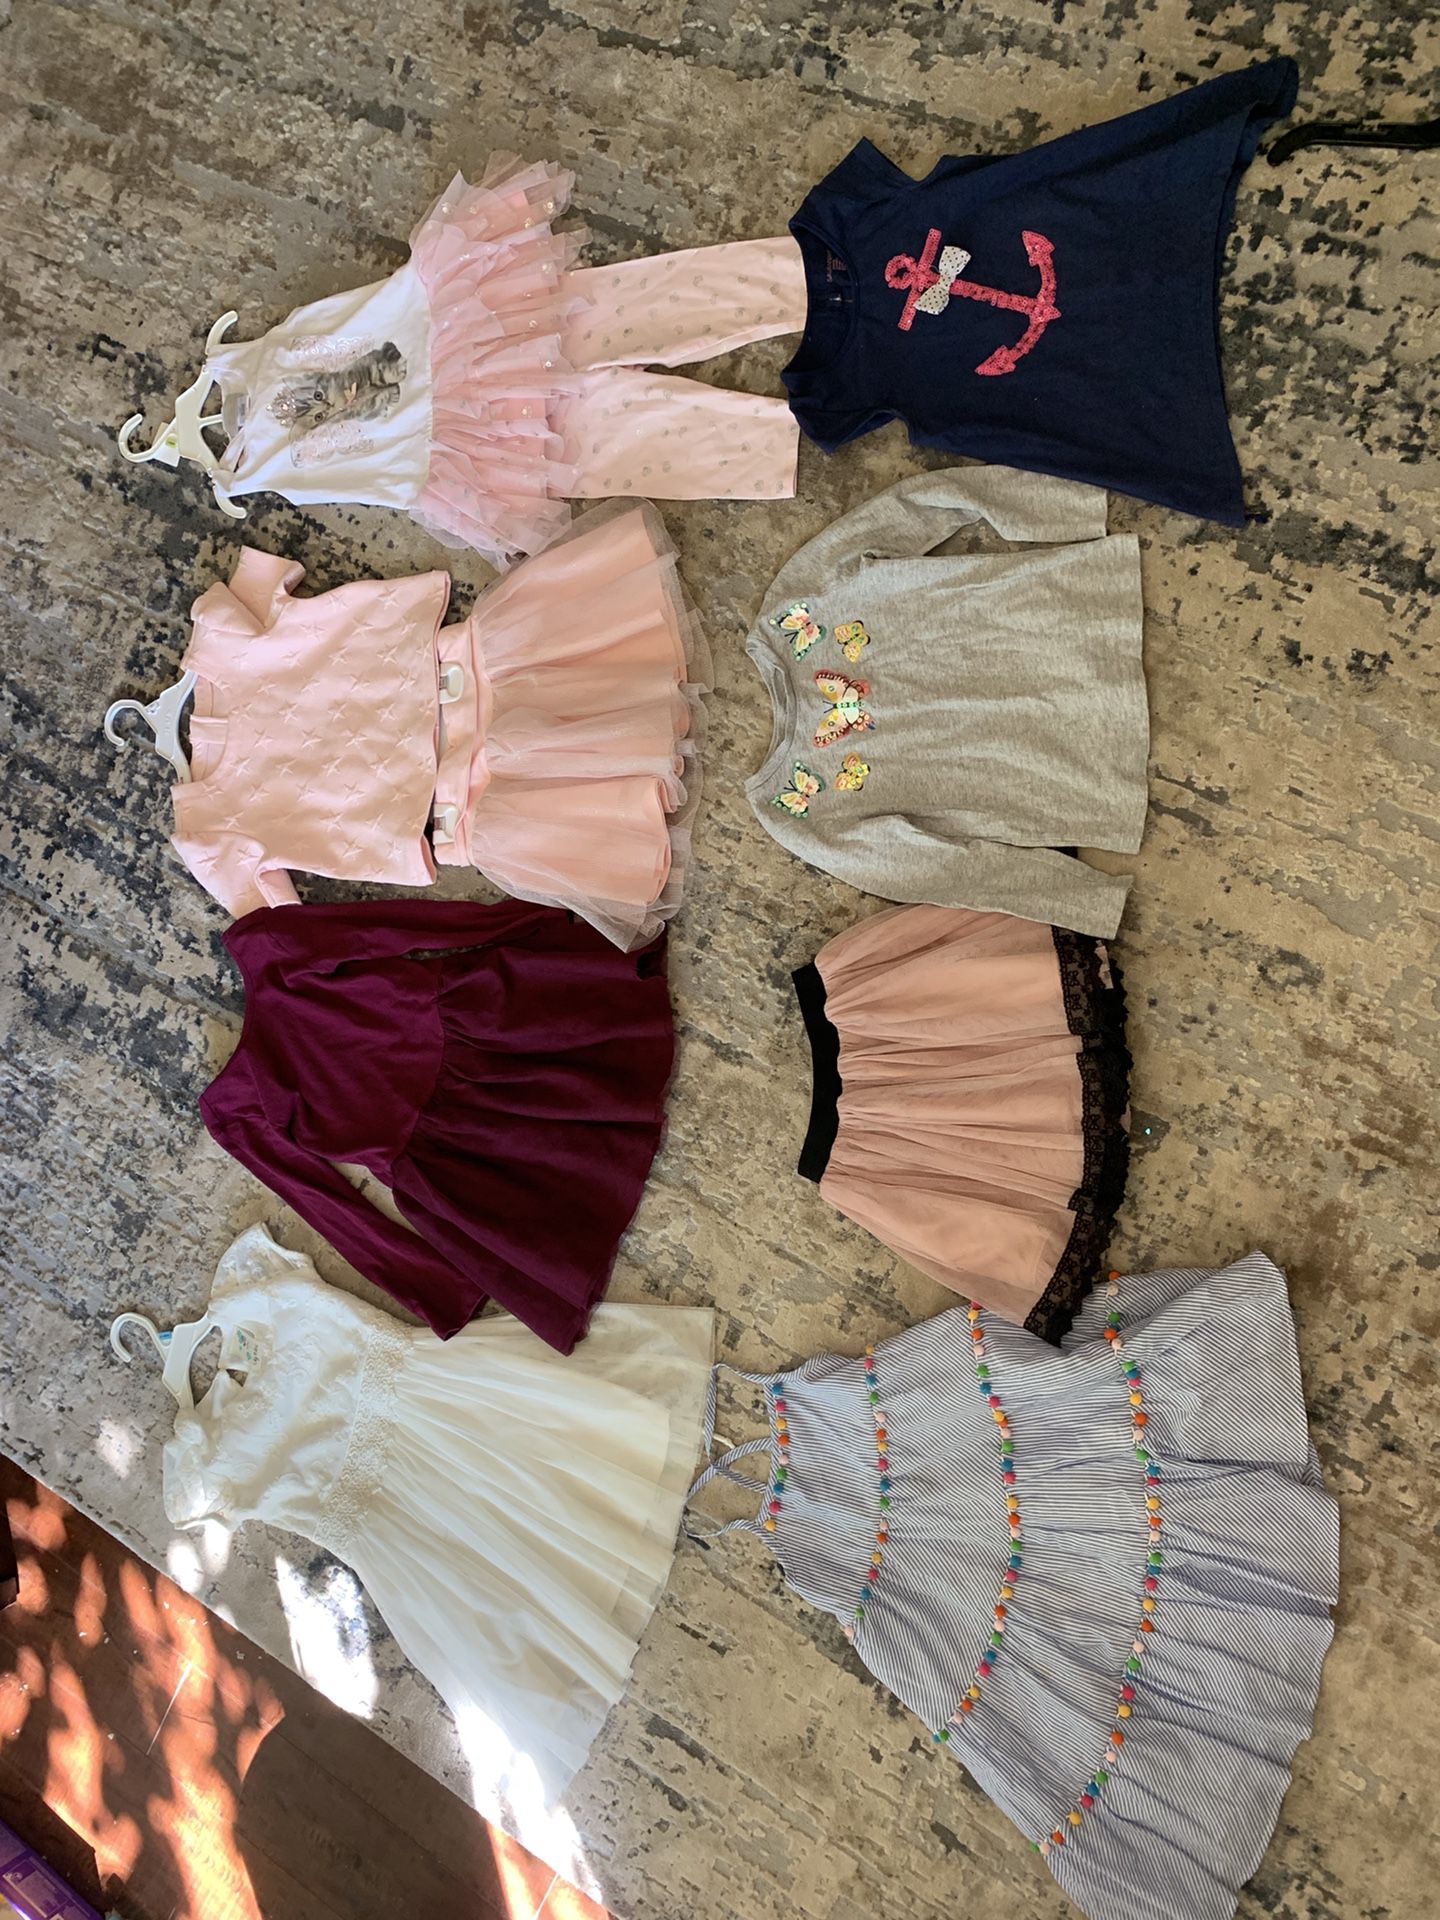 Girls 5t clothes